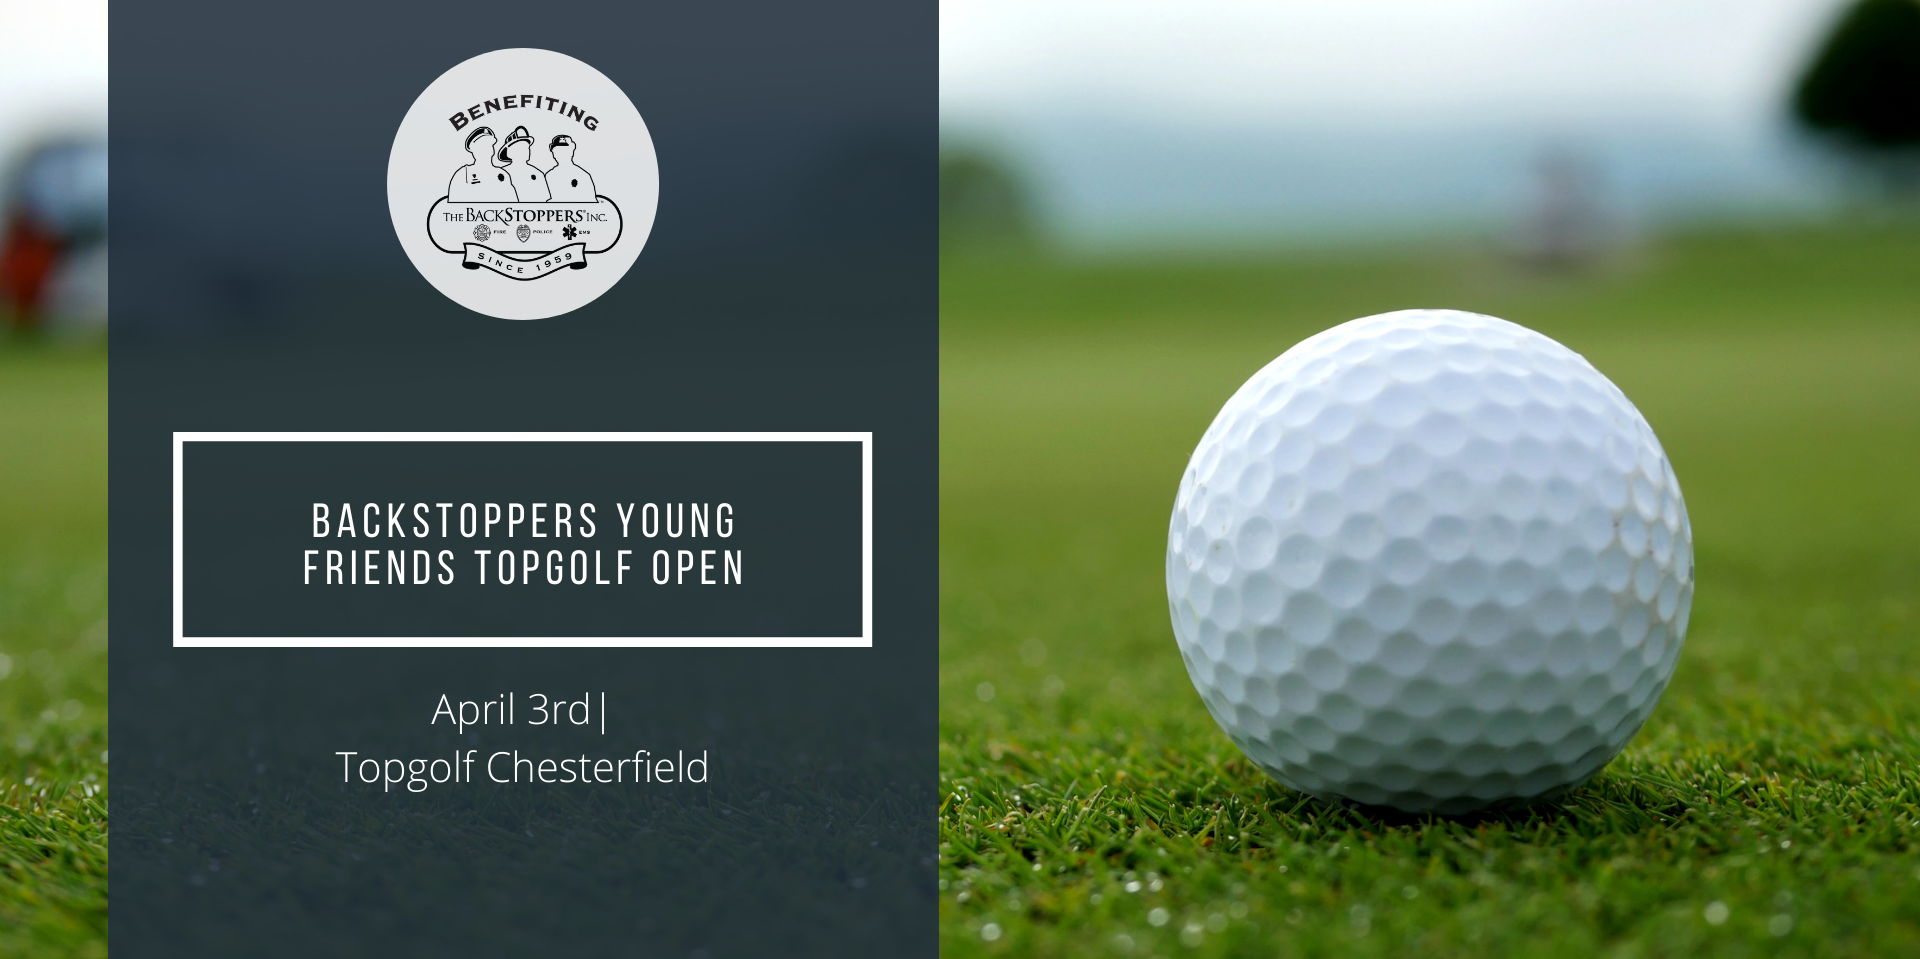 BackStoppers Young Friends Topgolf Open promotional image